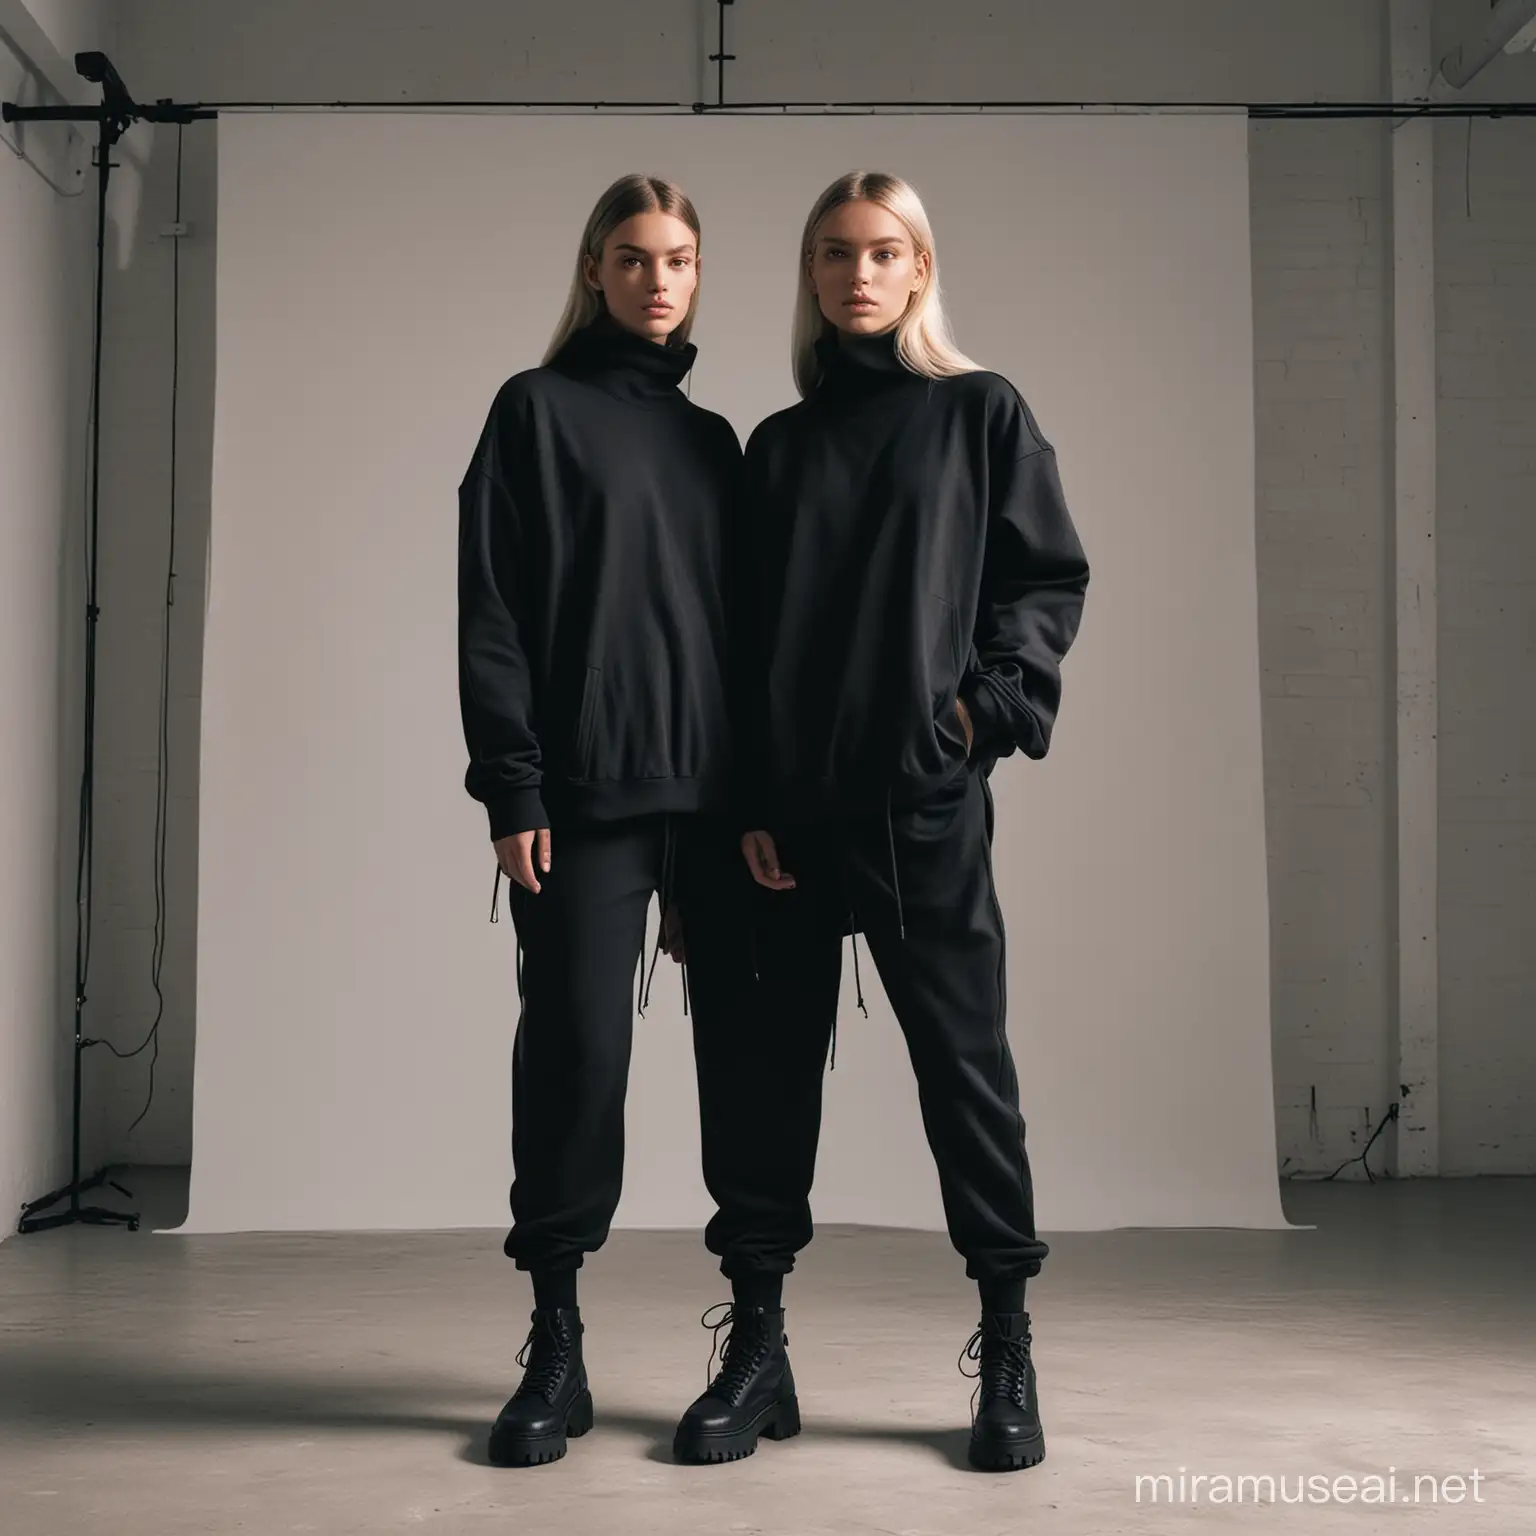 create models wearing all black oversized streetwear clothes in a minimalistic loft with a black and white color scheme lighting 